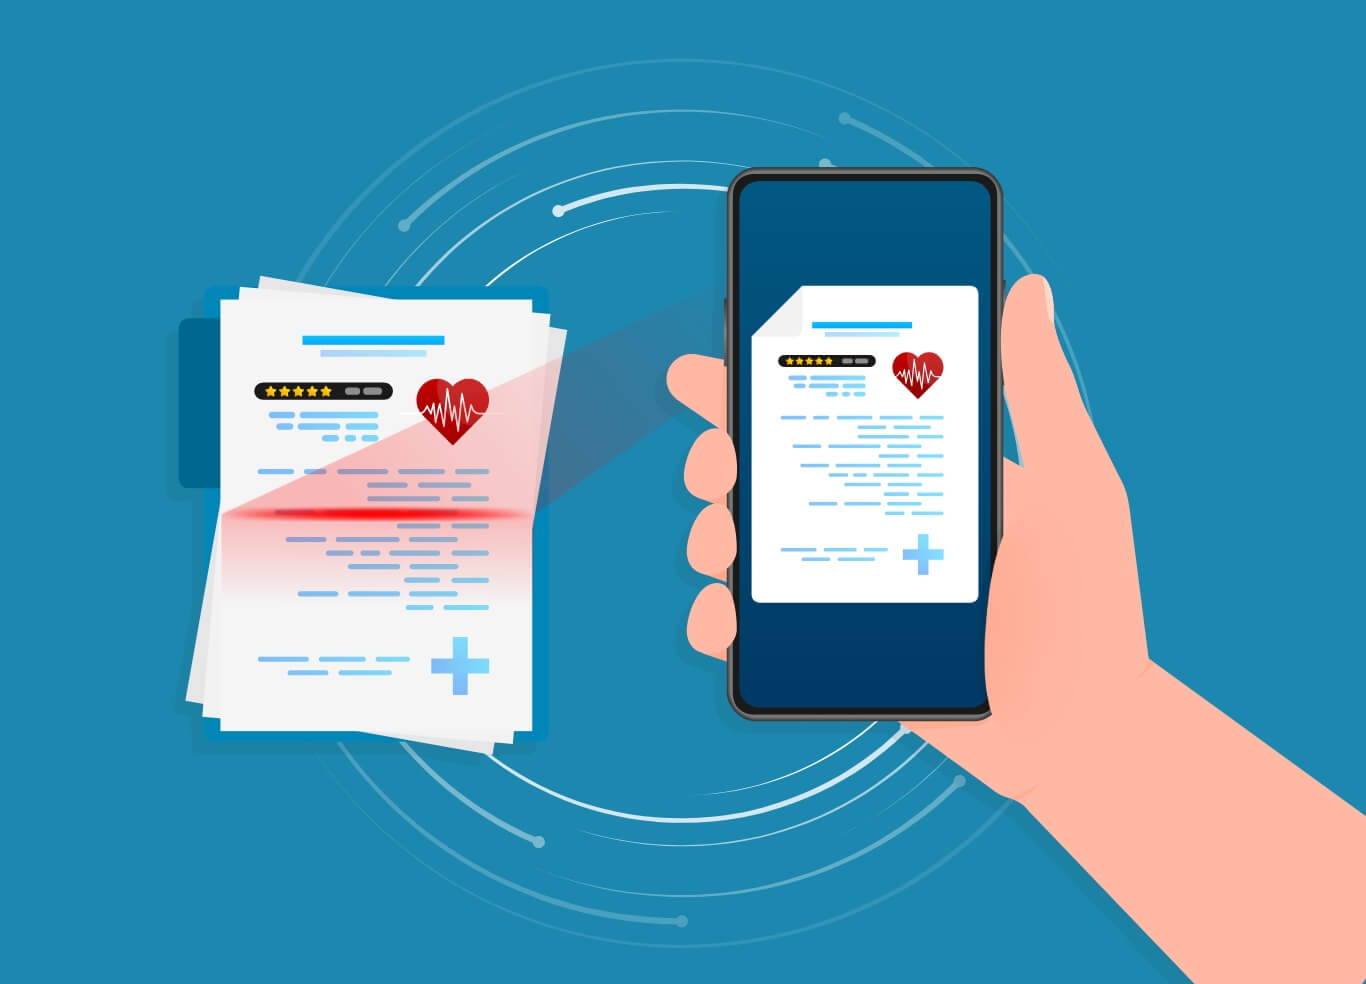 Revolutionizing Healthcare Records by Document Digitization